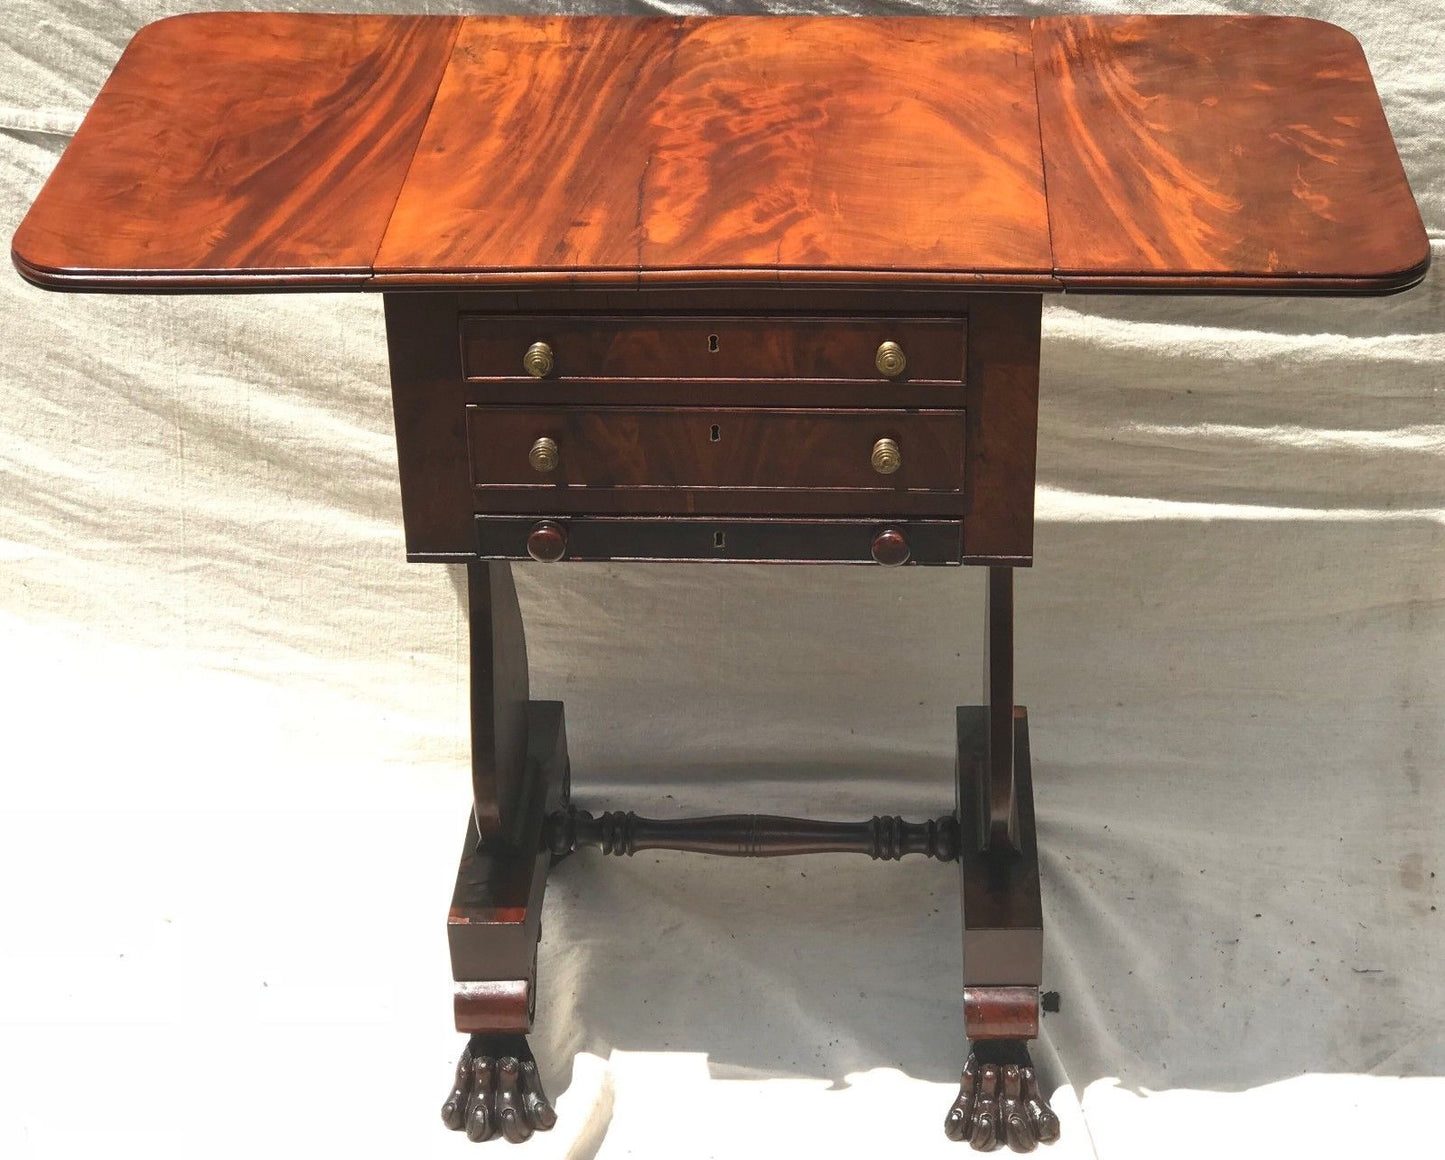 EARLY 19TH C. CLASSICAL MAHOGANY WORK TABLE BY ISAAC VOSE & THOMAS WIGHTMAN